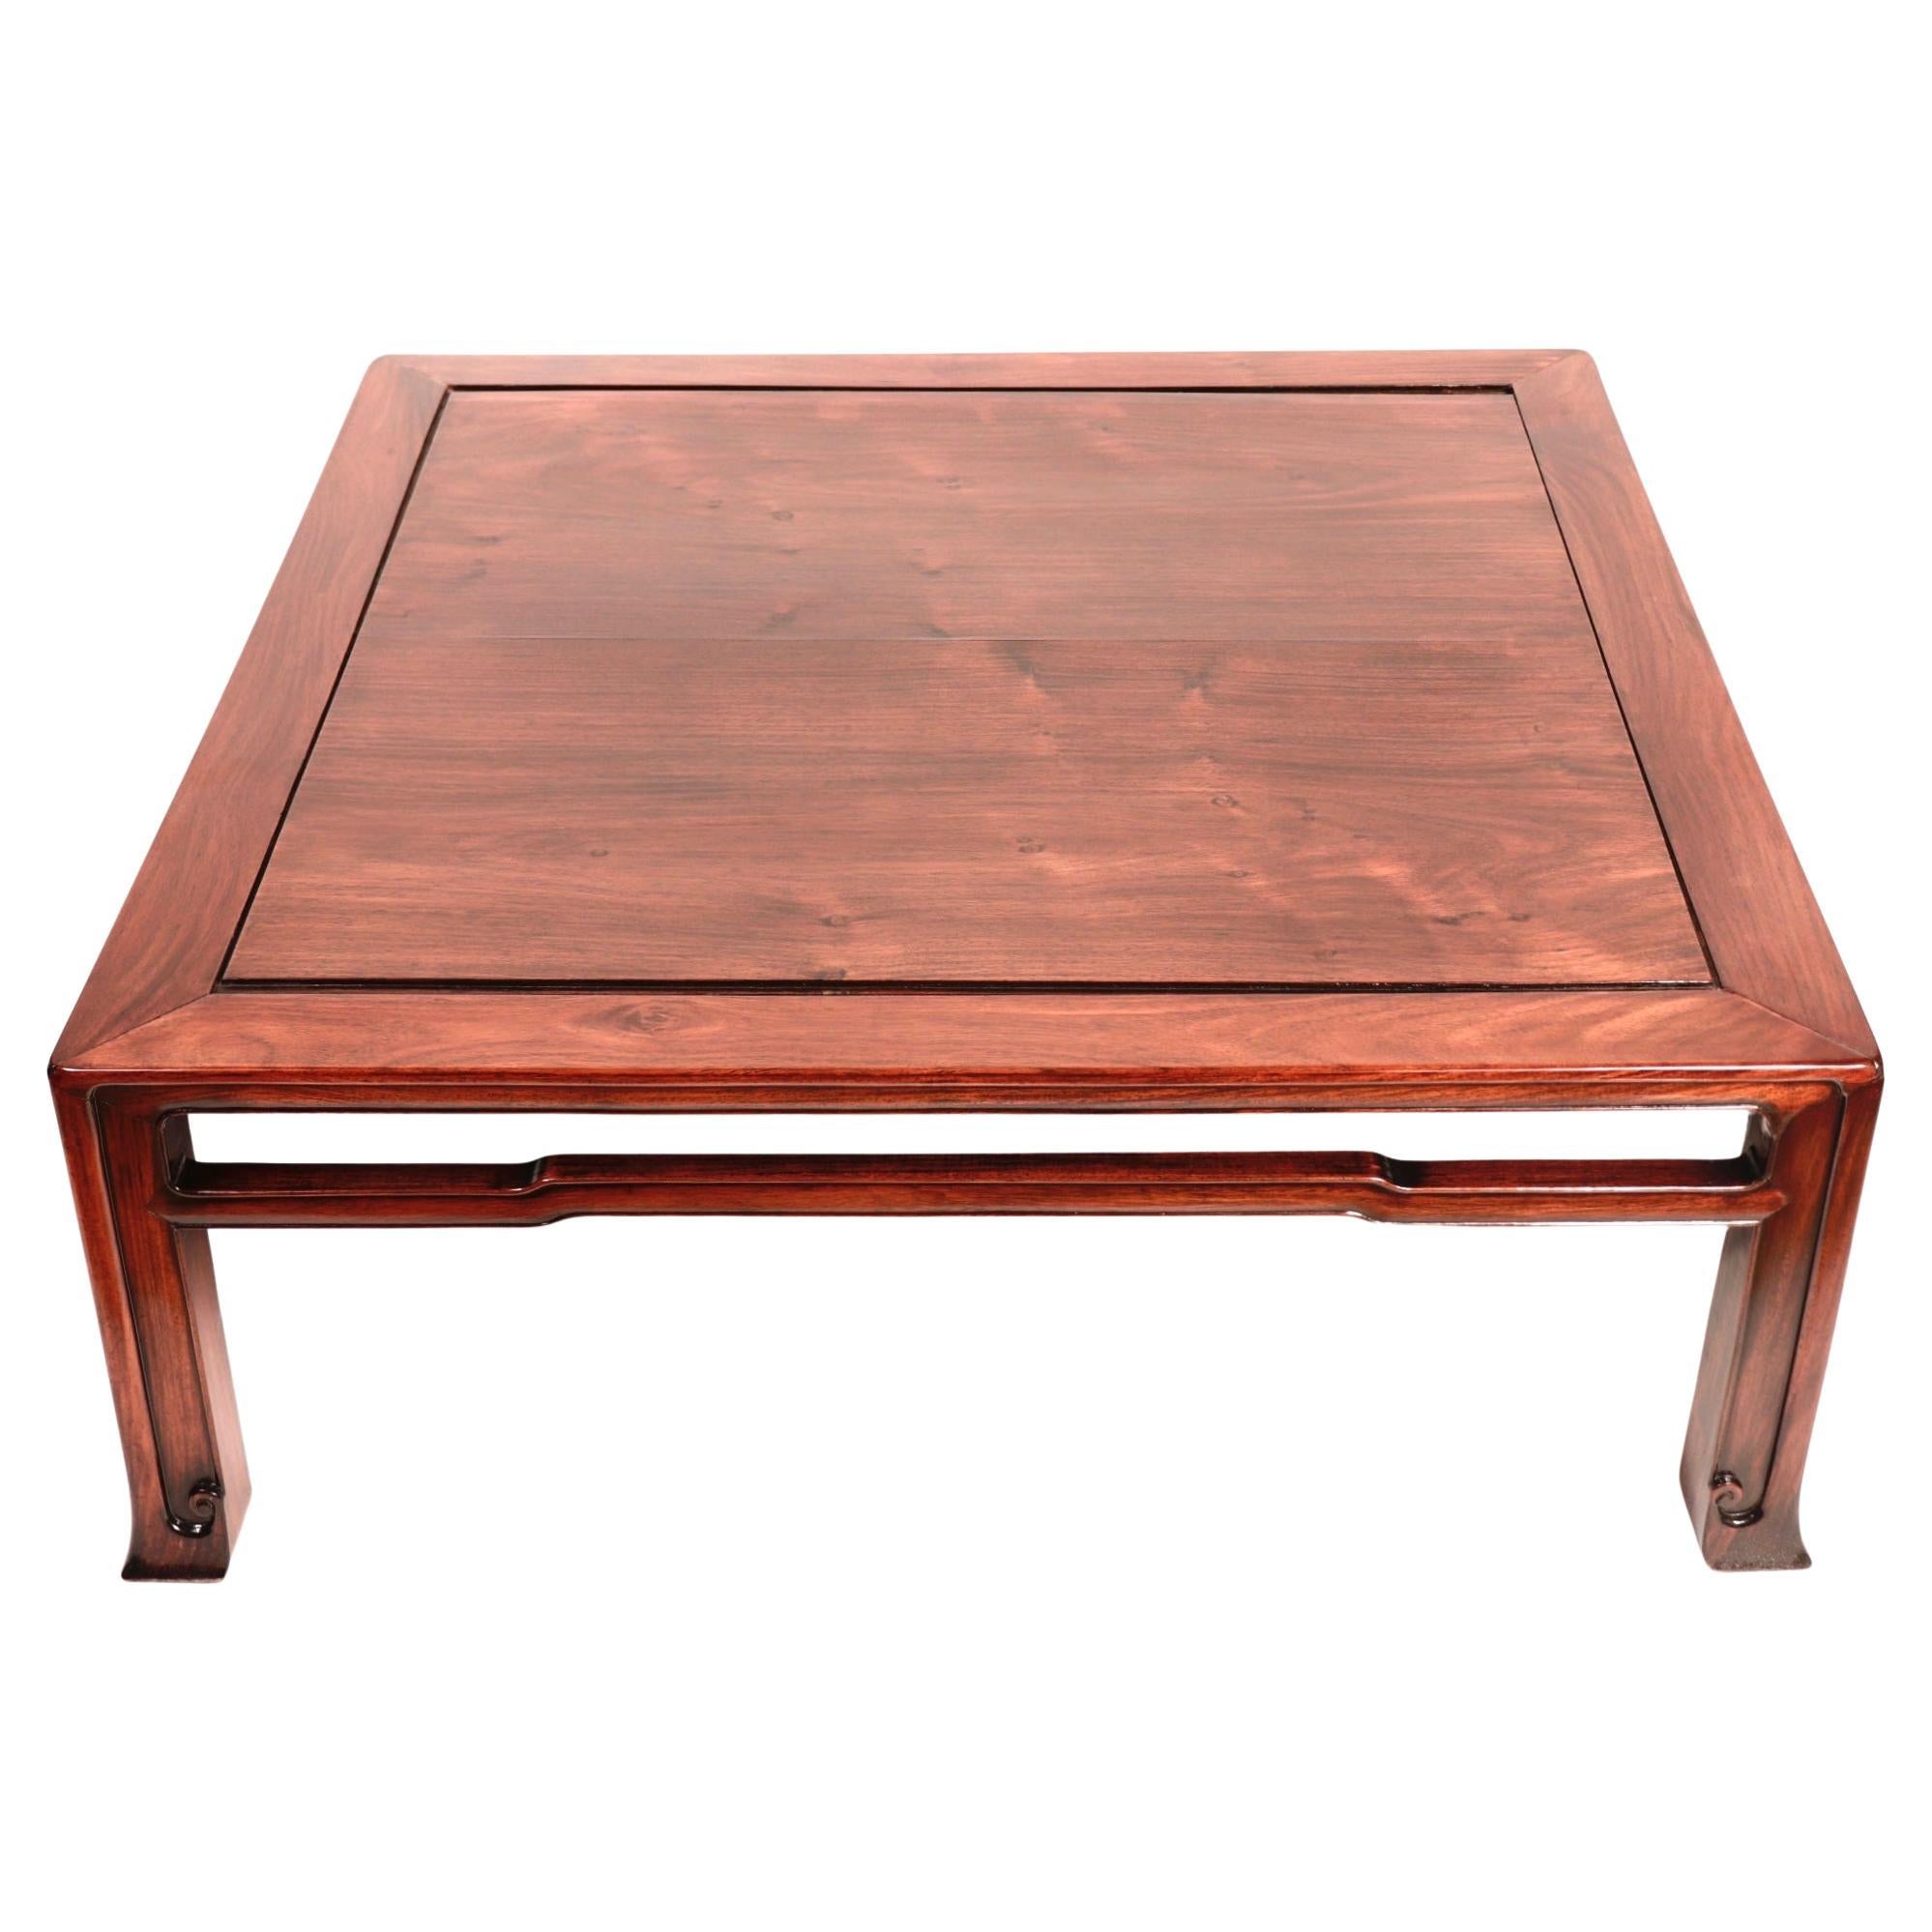 Japanese Rosewood Square Tea Table For Sale